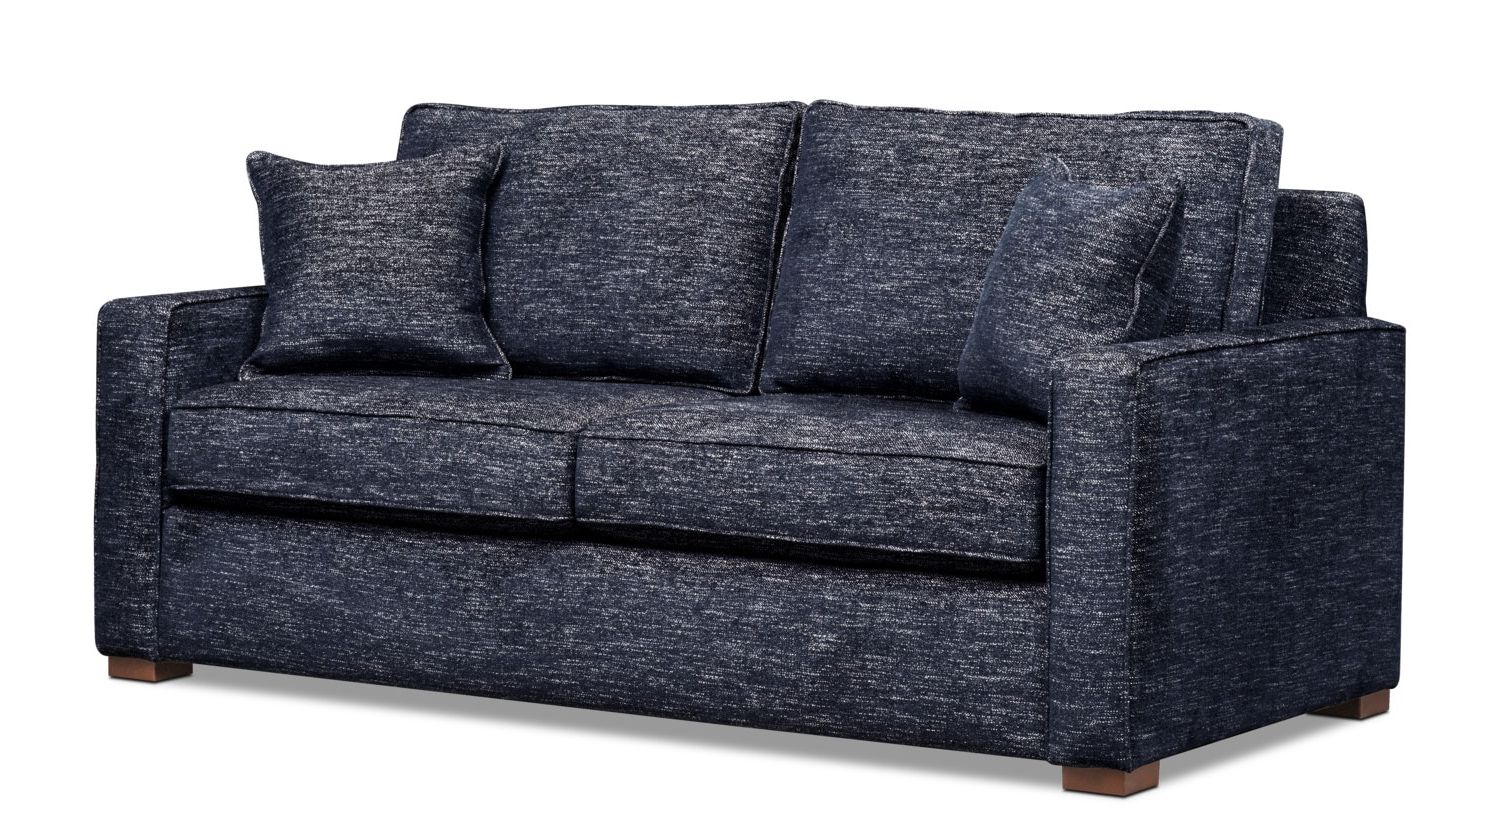 Mayson 78" Full Innerspring Sleeper Sofa – Navy | American Signature For Navy Sleeper Sofa Couches (Gallery 1 of 20)